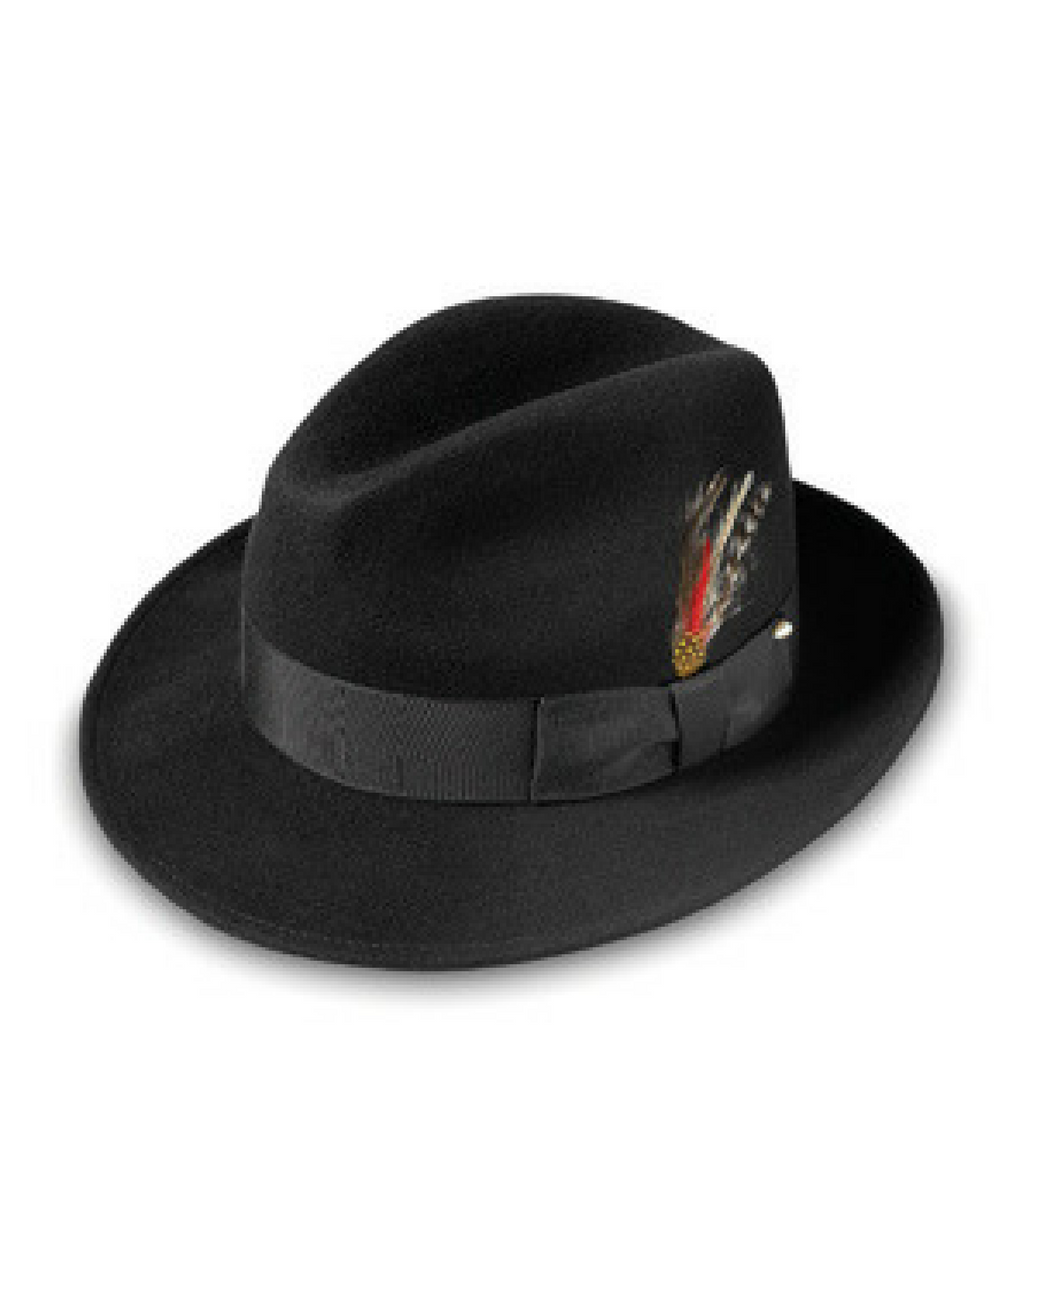 A black fedora with a black hat band, accented with a small feather.